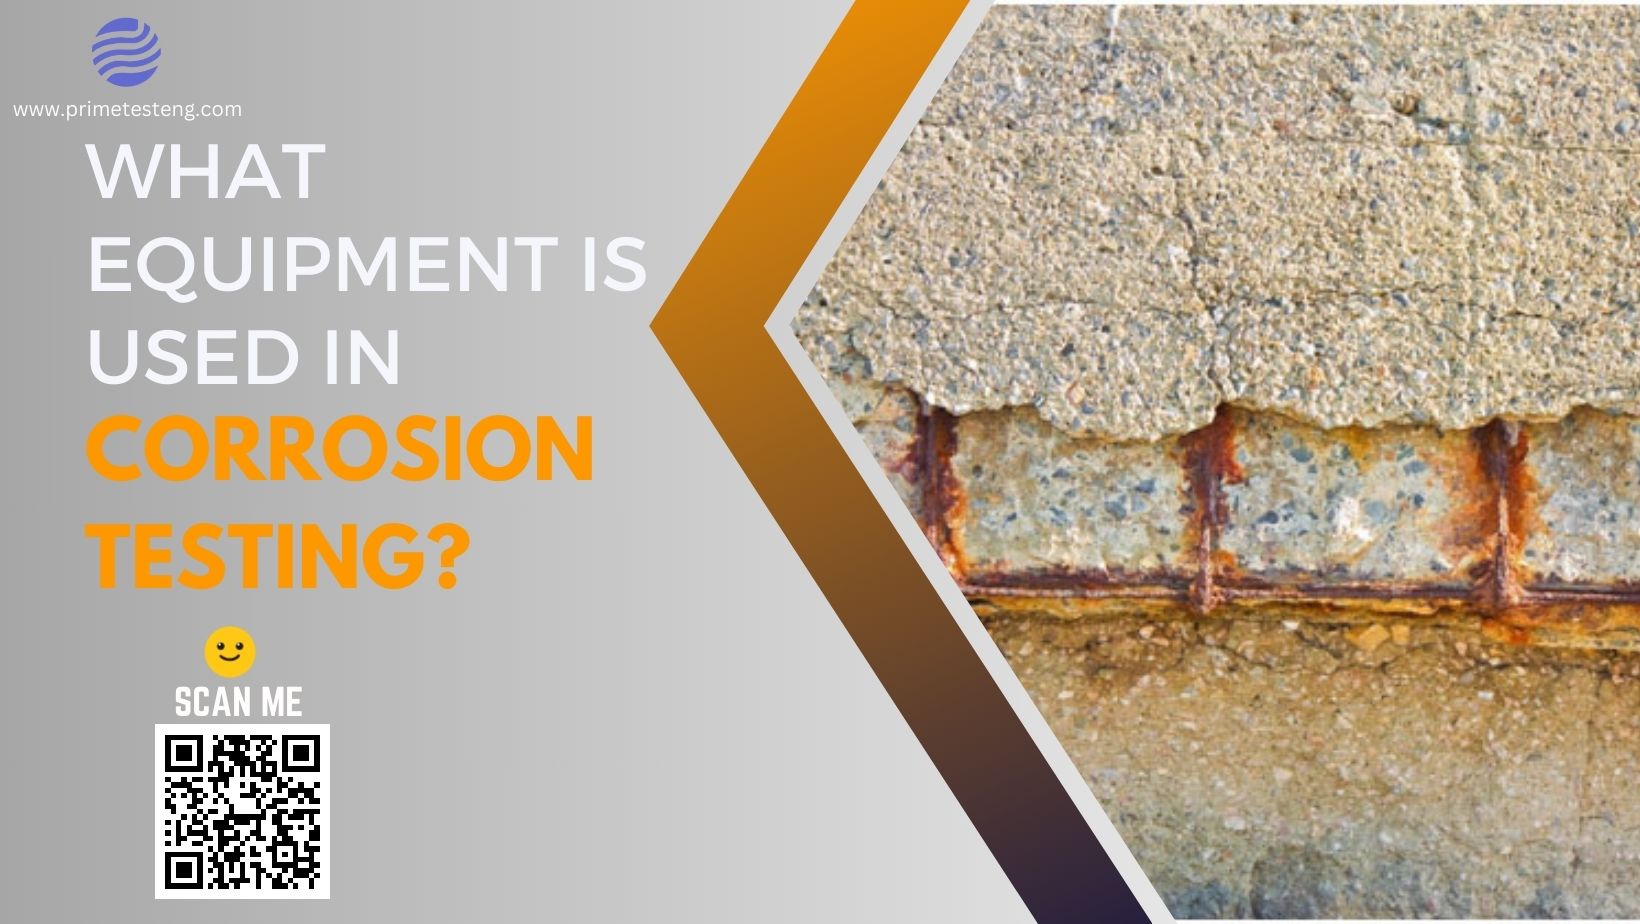 What Equipment is Used in Corrosion Testing?